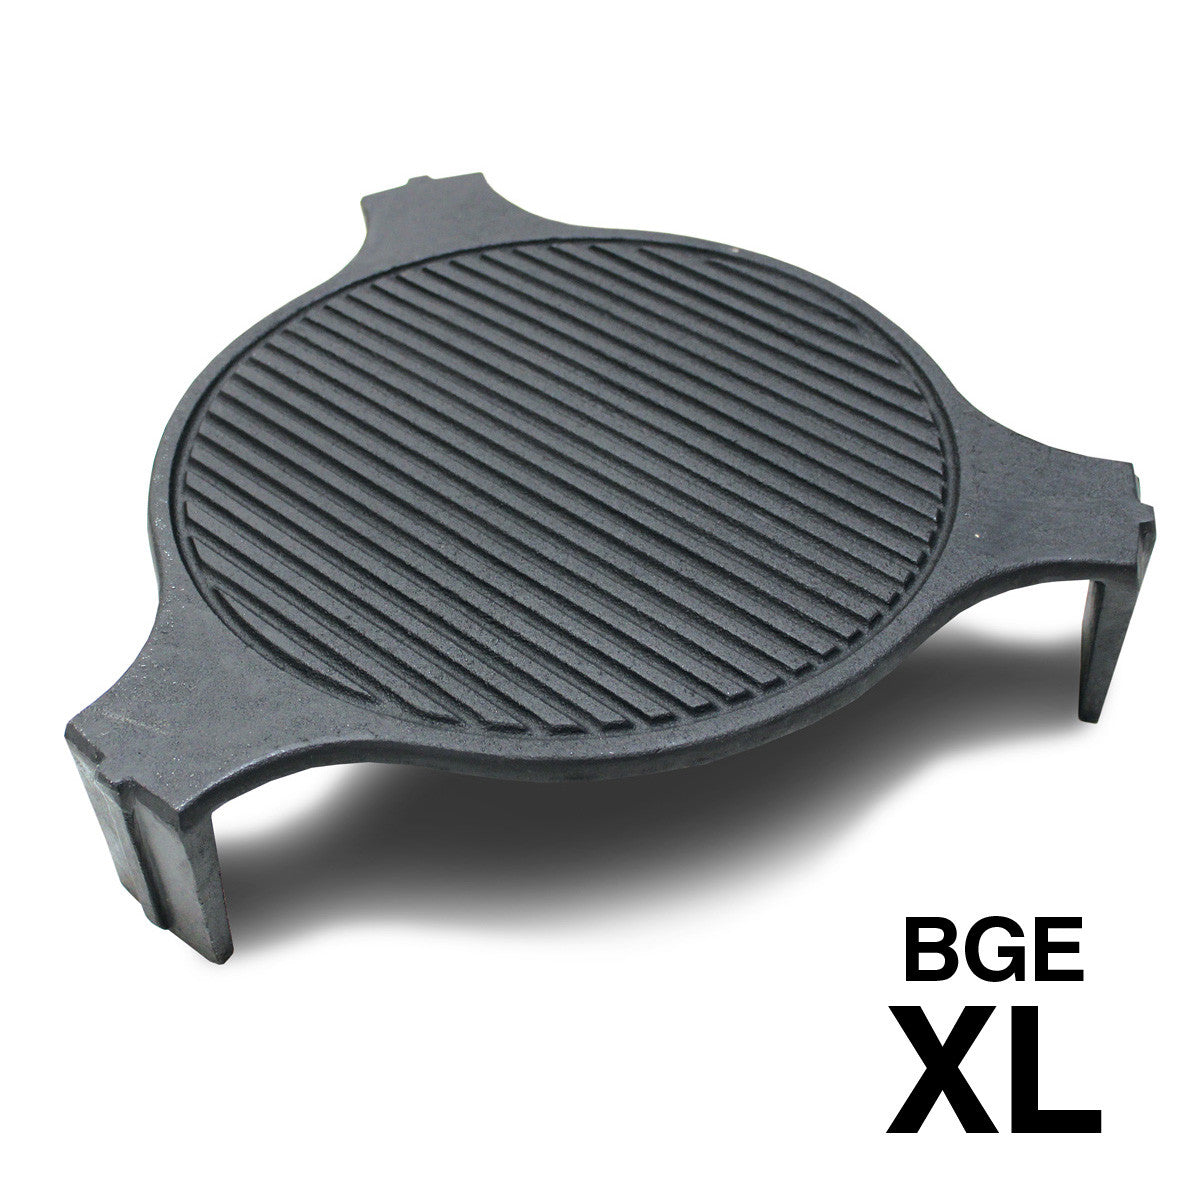 SmokeWare Stainless Steel Drip Pan - Big Green Egg Grilling Accessory, 10-Inch Diameter